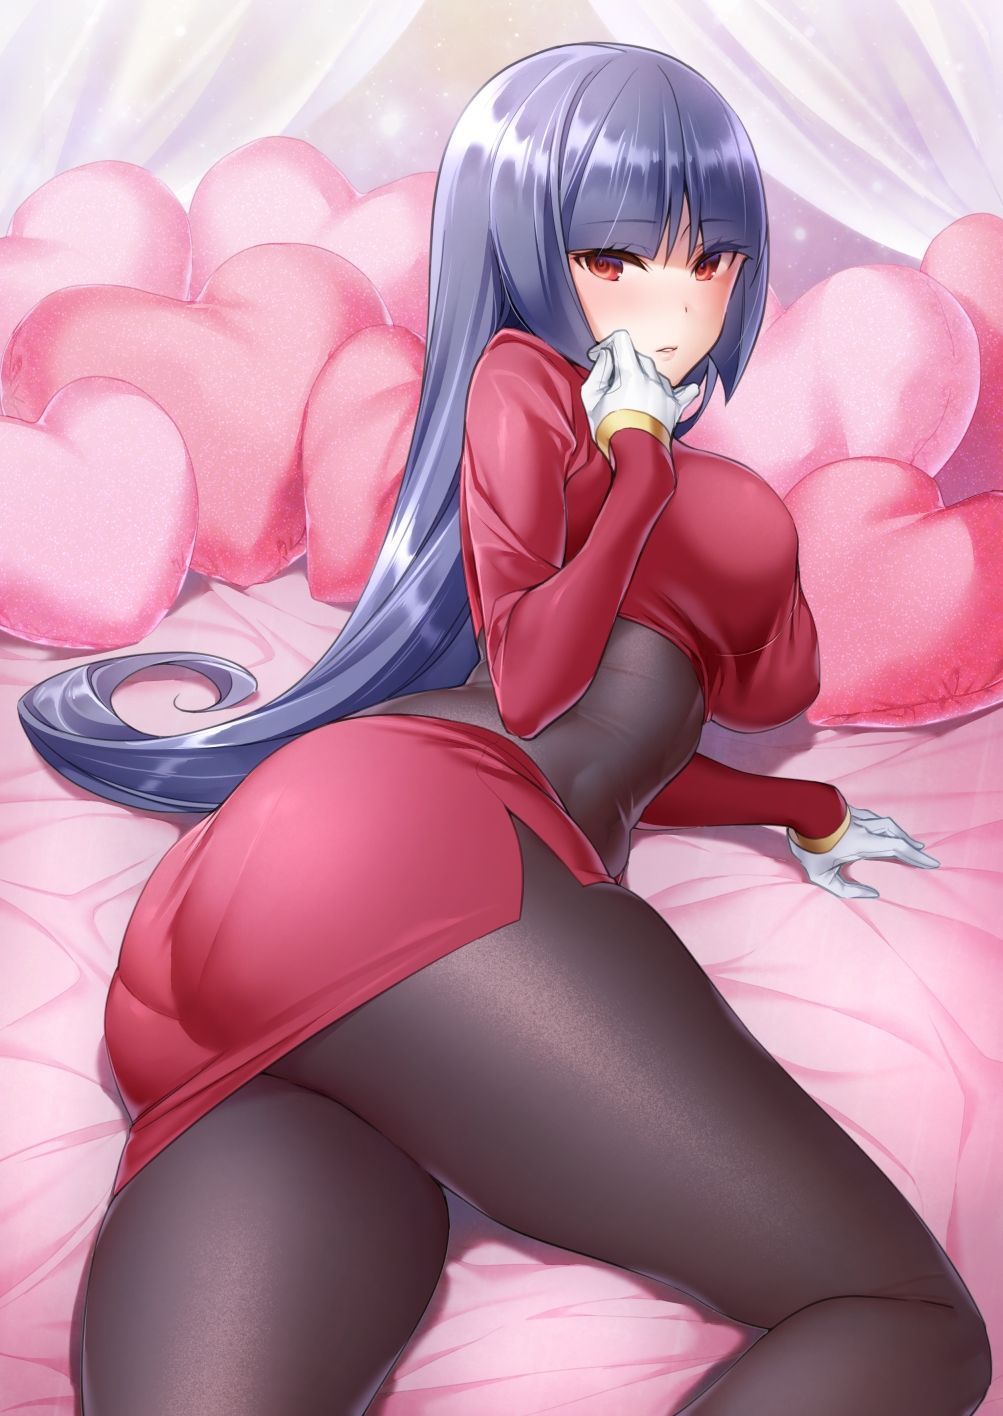 【Secondary Erotic】 Here is an erotic image of a girl wearing a tight costume so tight that you can see the panty line 3